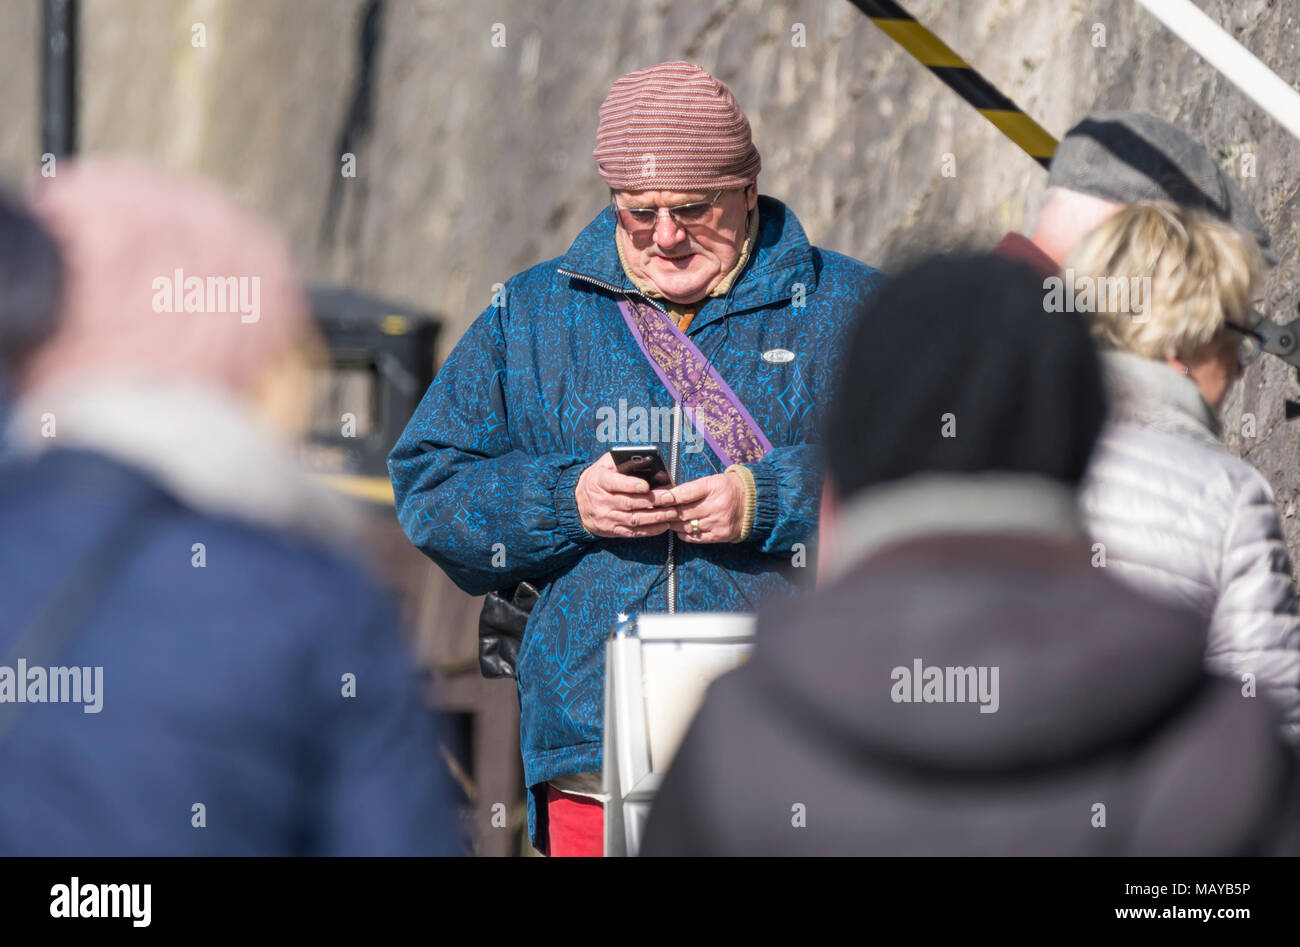 Middle aged or elderly man standing outside texting on a mobile phone in the UK. Senior using technology, sending text. Stock Photo